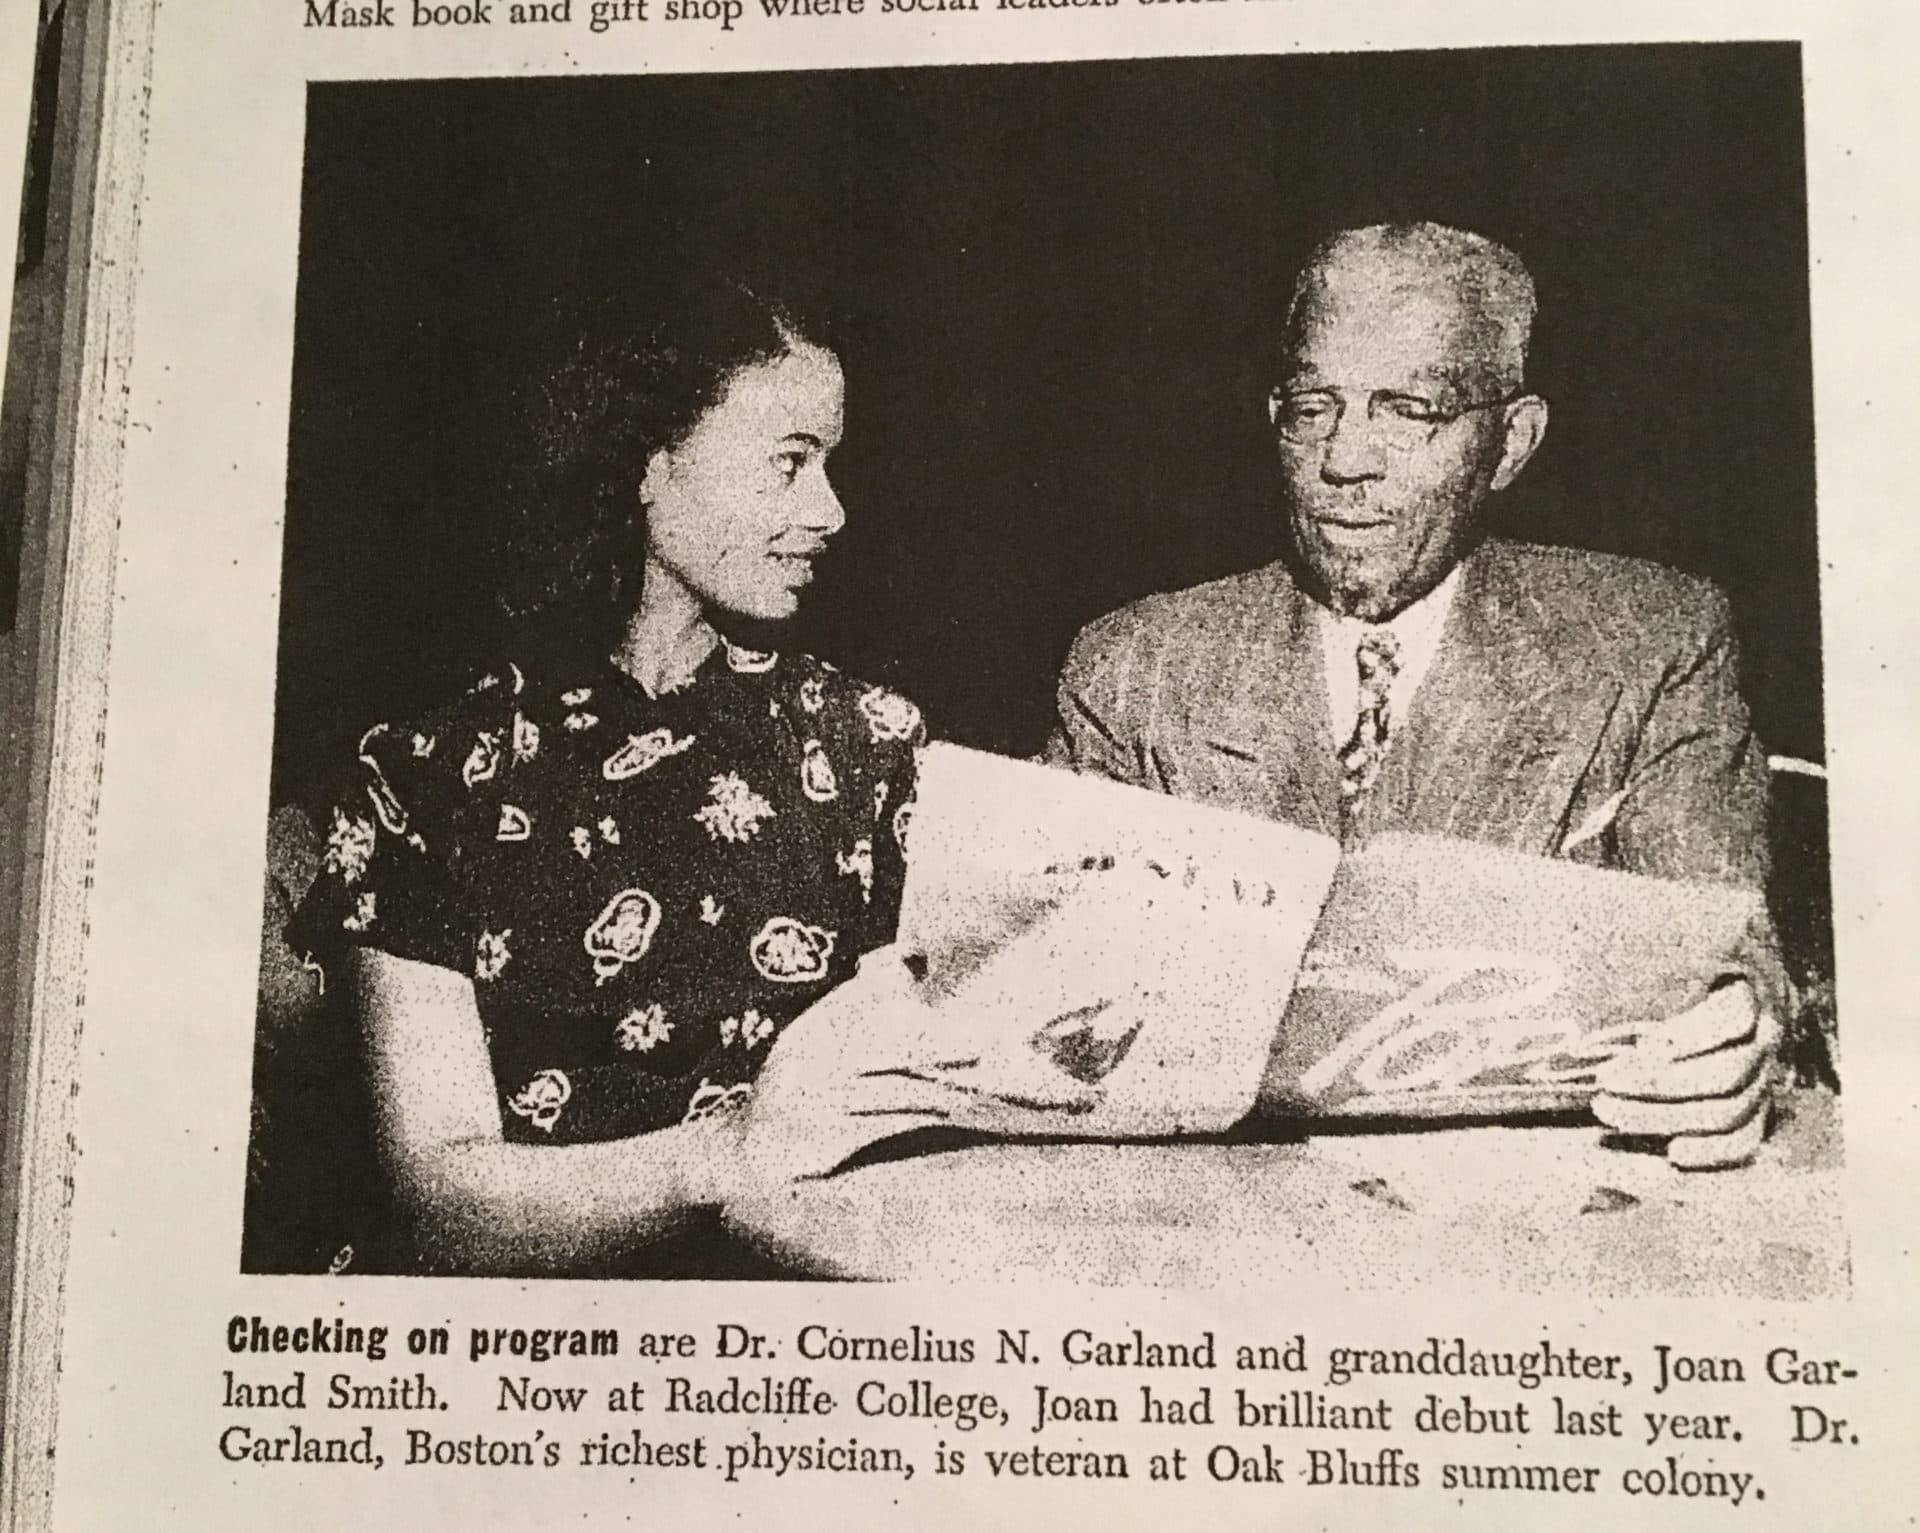 A photo feature from Ebony Magazine in 1949, featuring Dr. Garland and his granddaughter, Joan. (Courtesy Lisa Gordon via Alison Barnet)